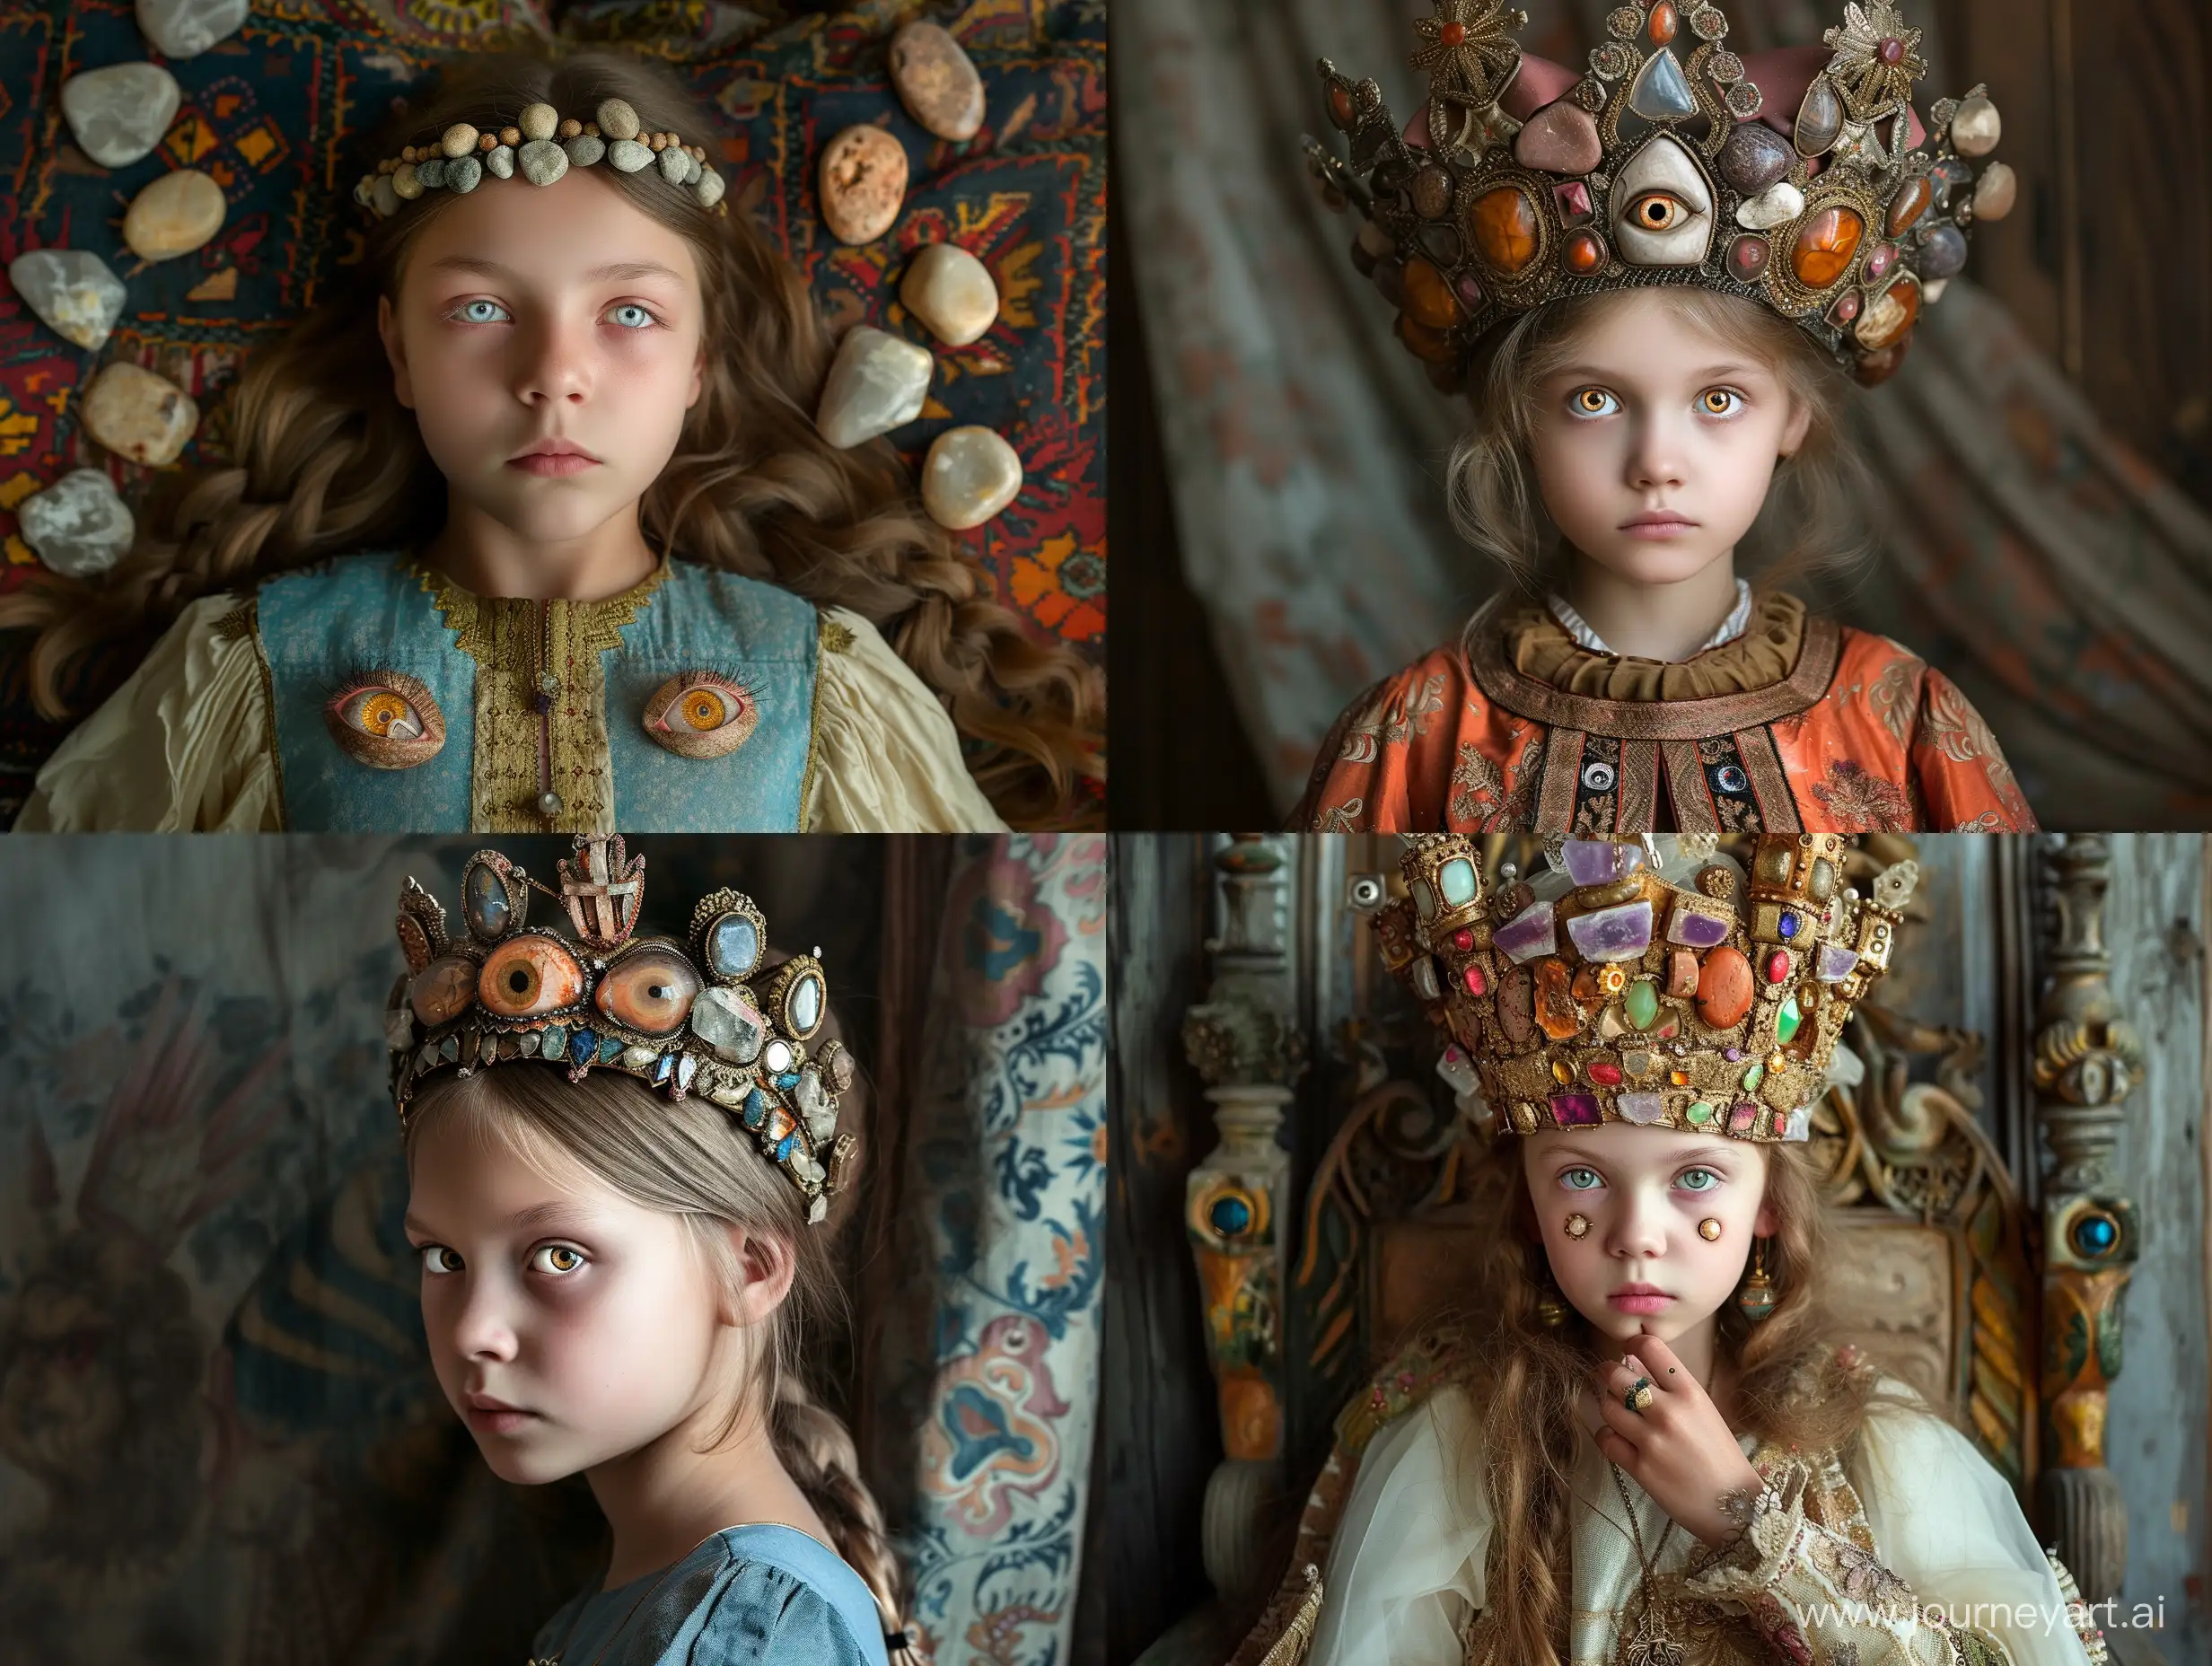 Enchanting-Tale-of-a-Young-Girl-and-the-Lost-Kingdom-Crown-in-Russian-Folk-Style